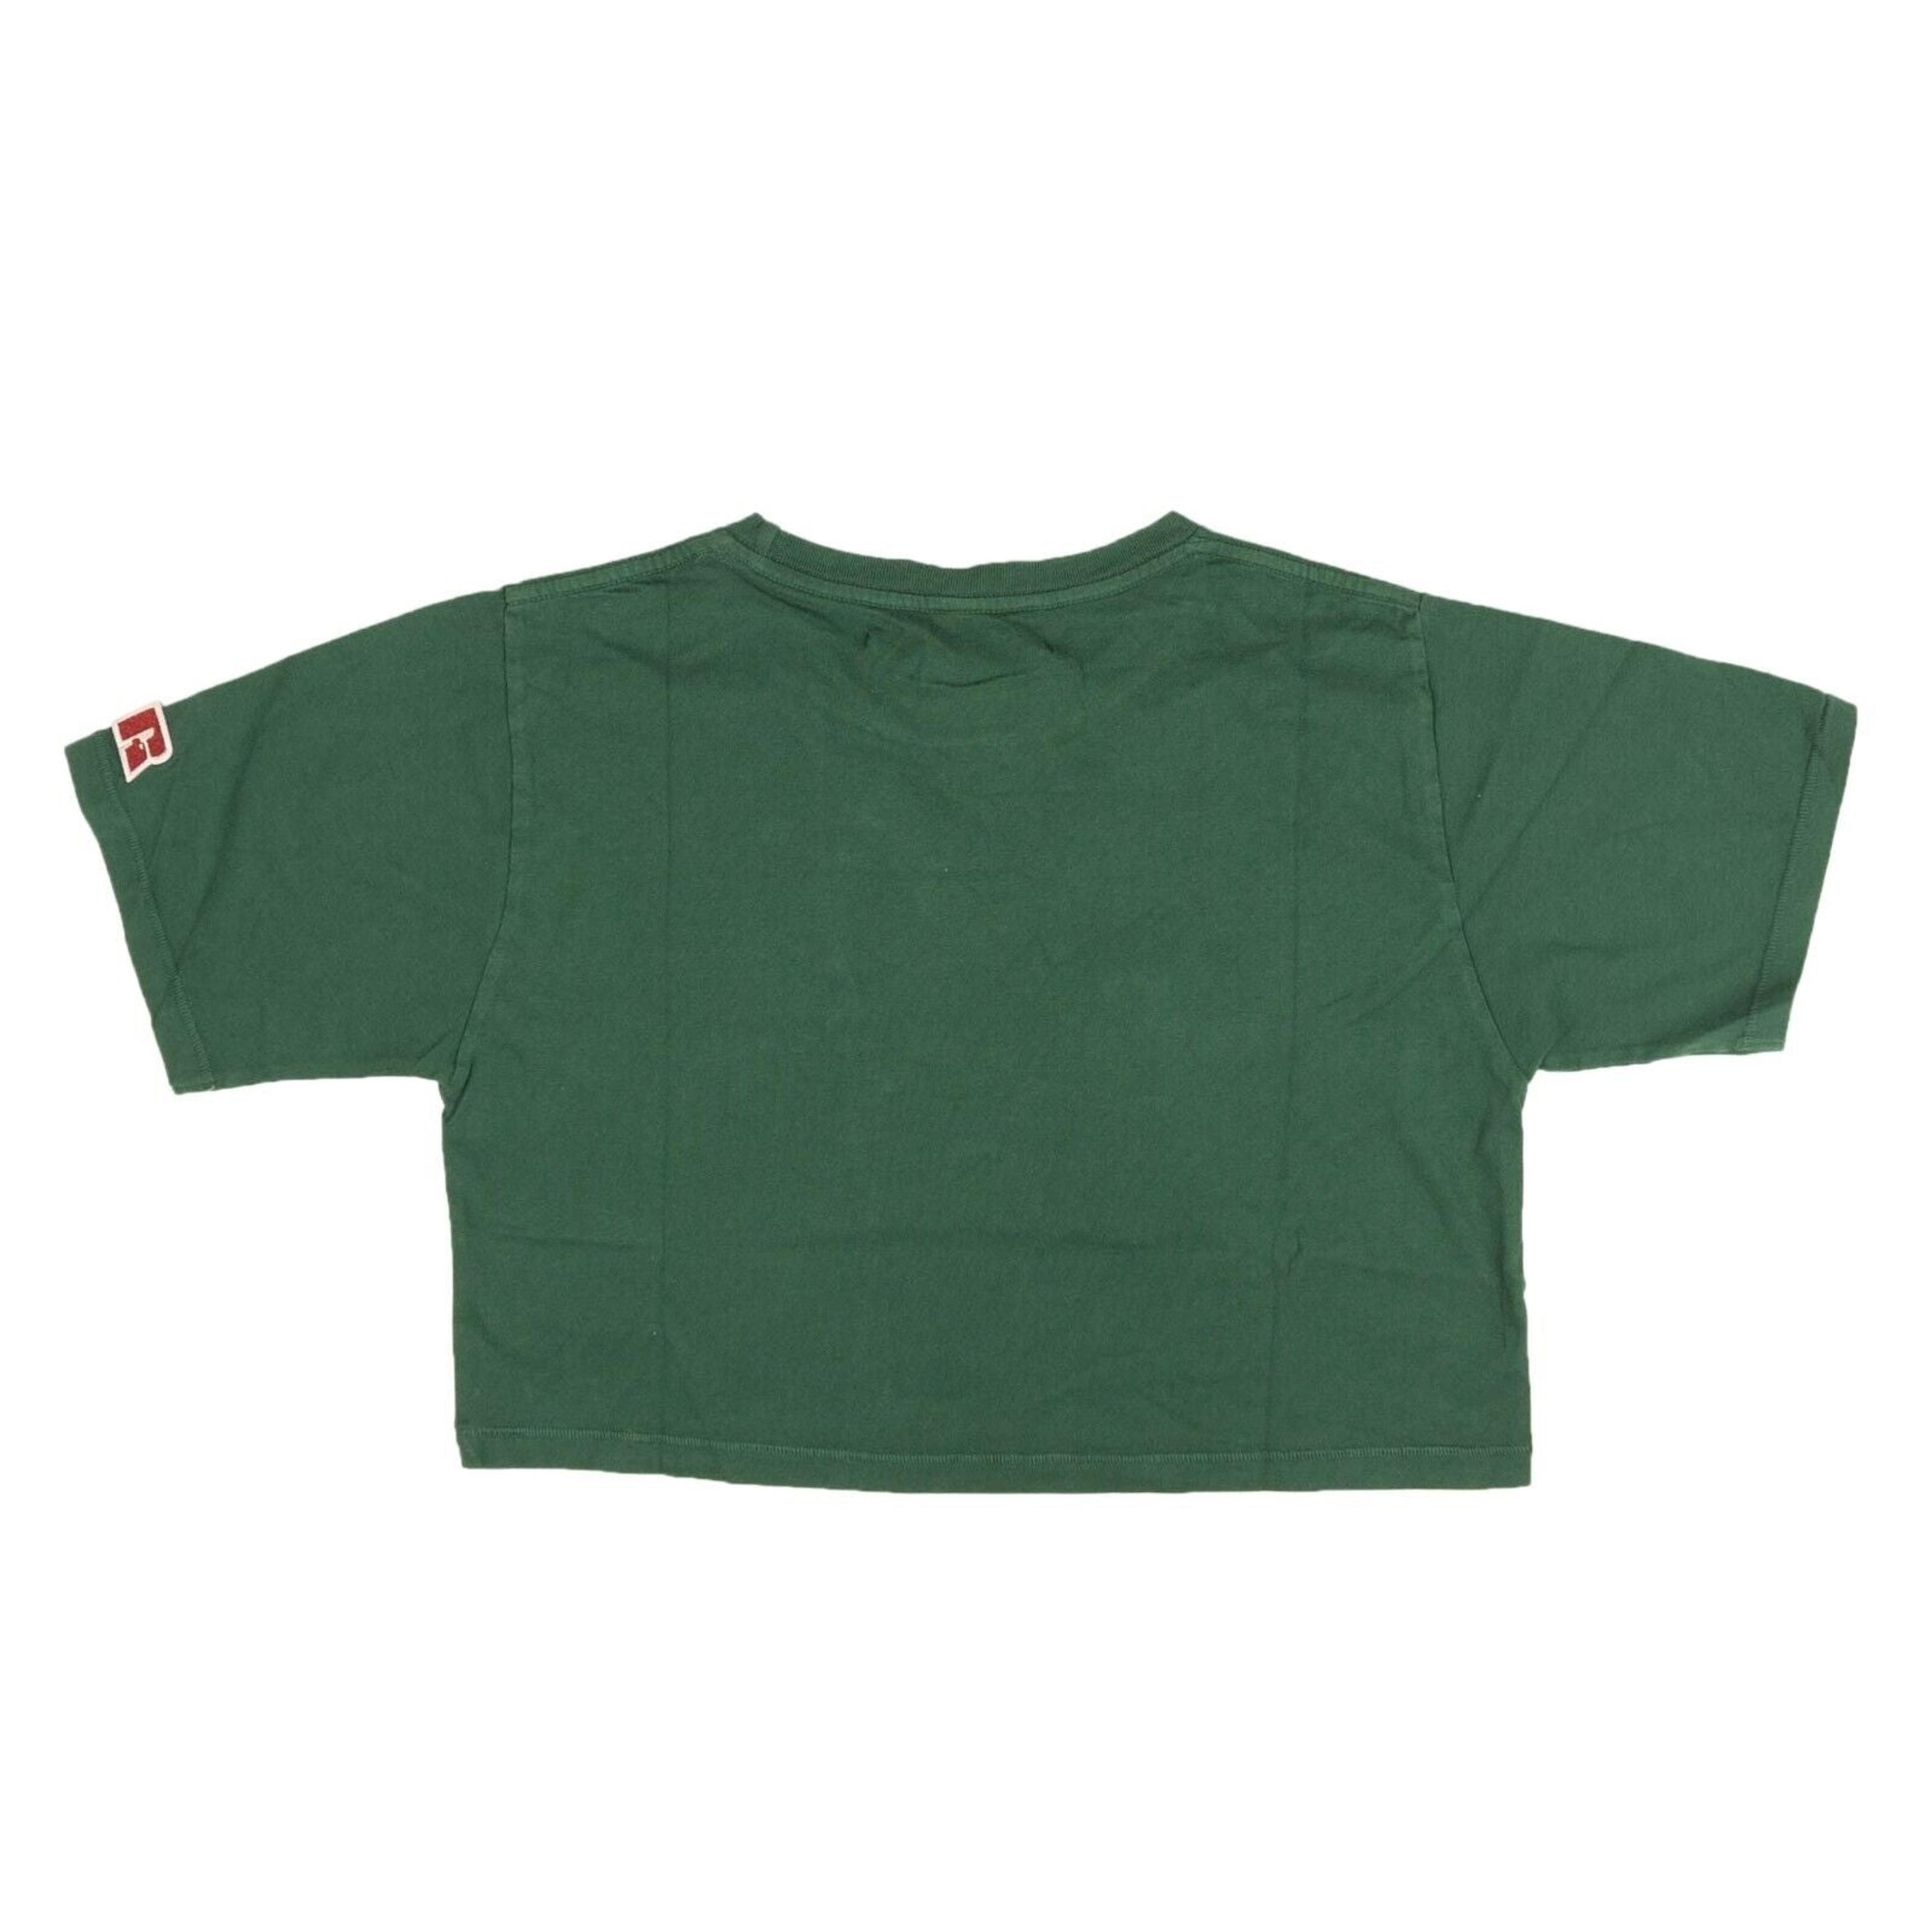 Alternate View 2 of Visitor On Earth Cropped Logo T-Shirt - Green